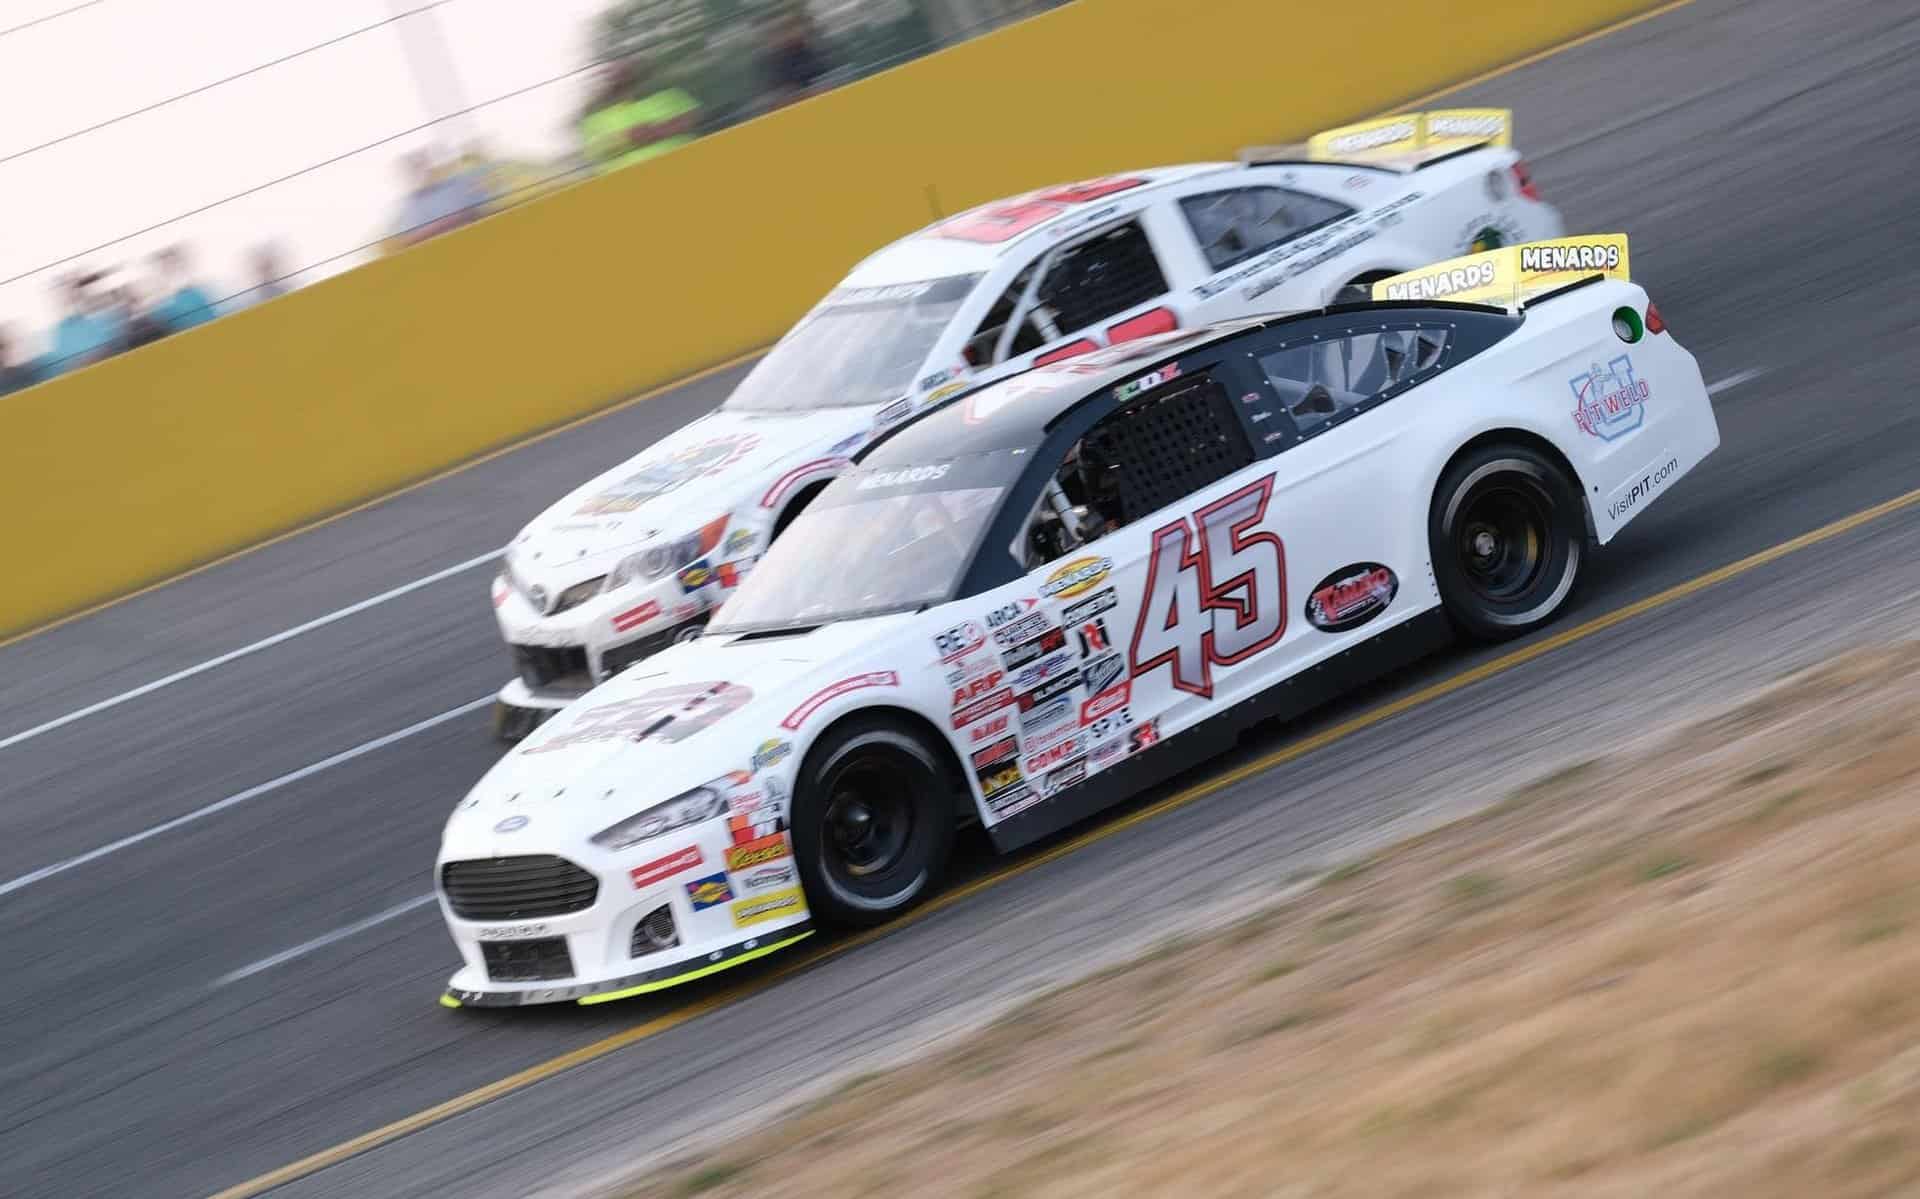 Tony Cosentino is blazing his own path and overcoming adversity in the ARCA Menards Series one step at a time.